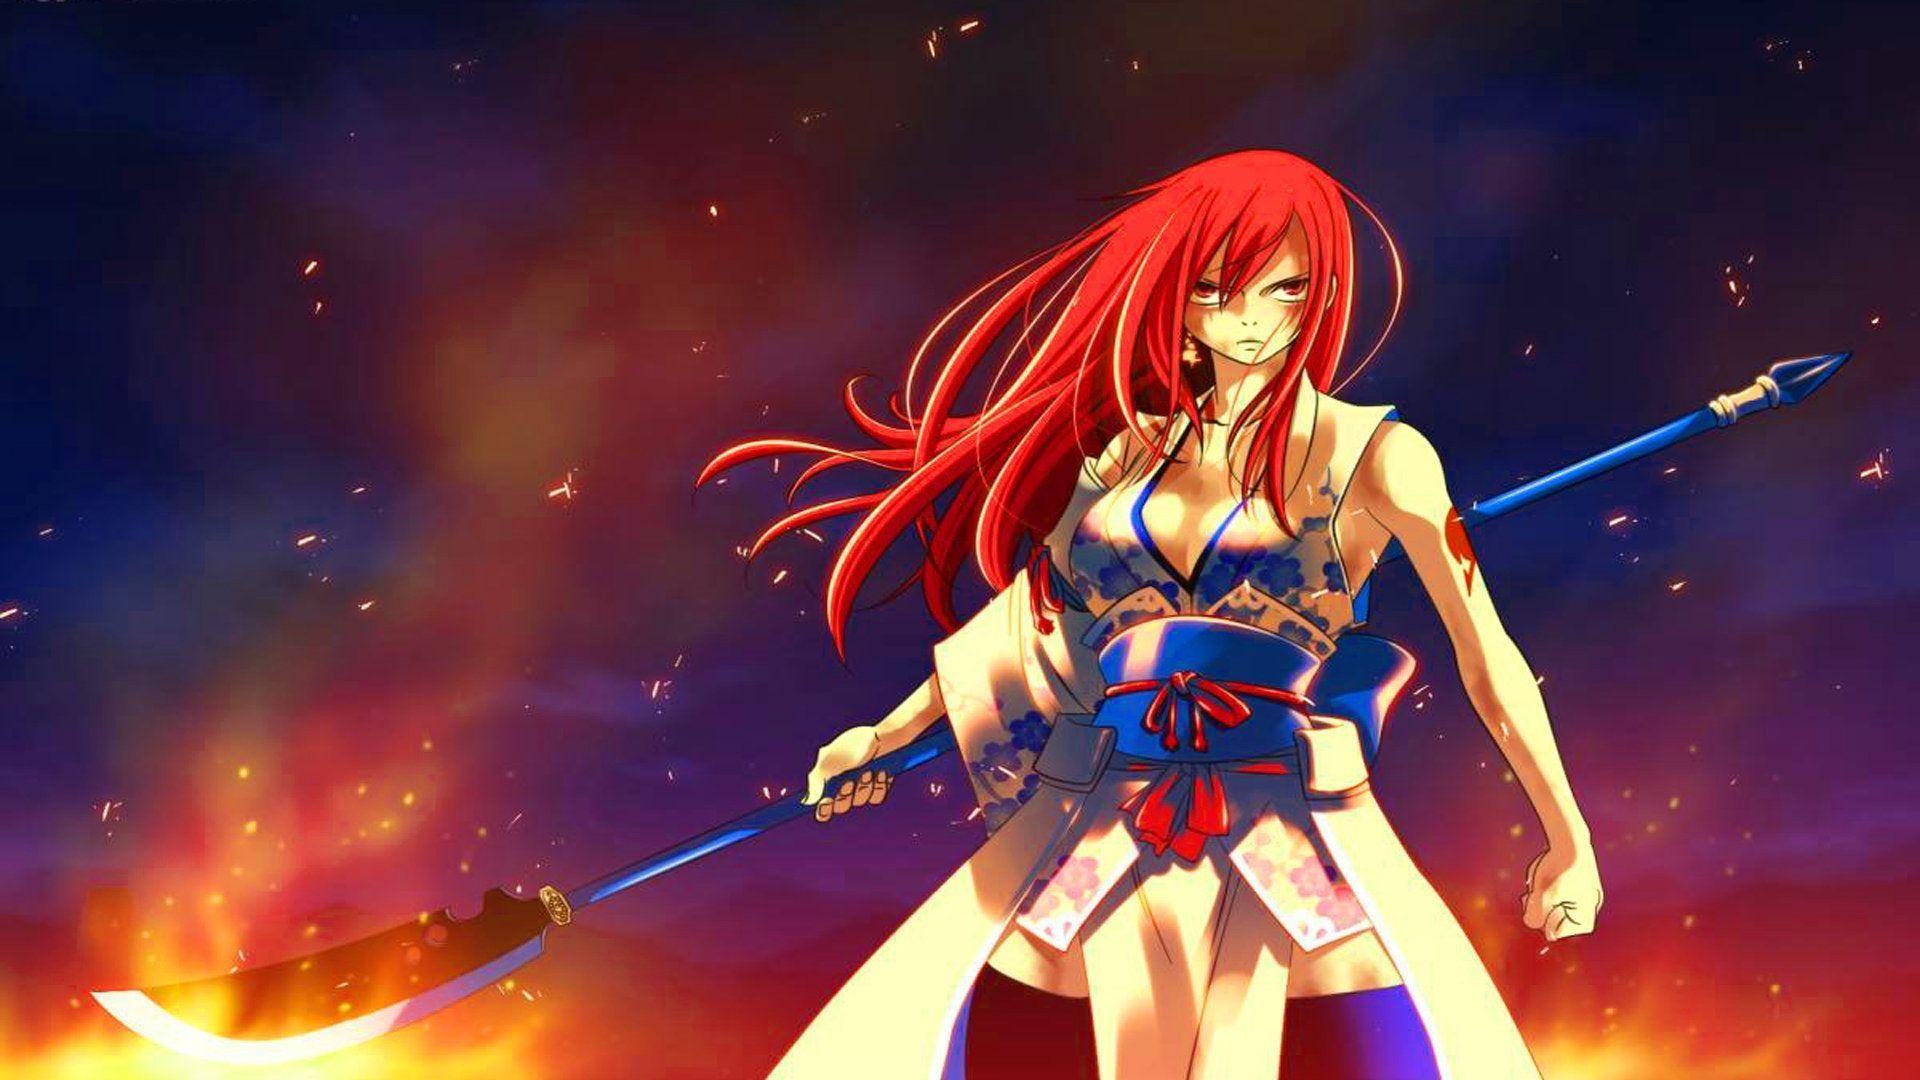 Fairy Tail Wallpaper HD Erza Image & Picture